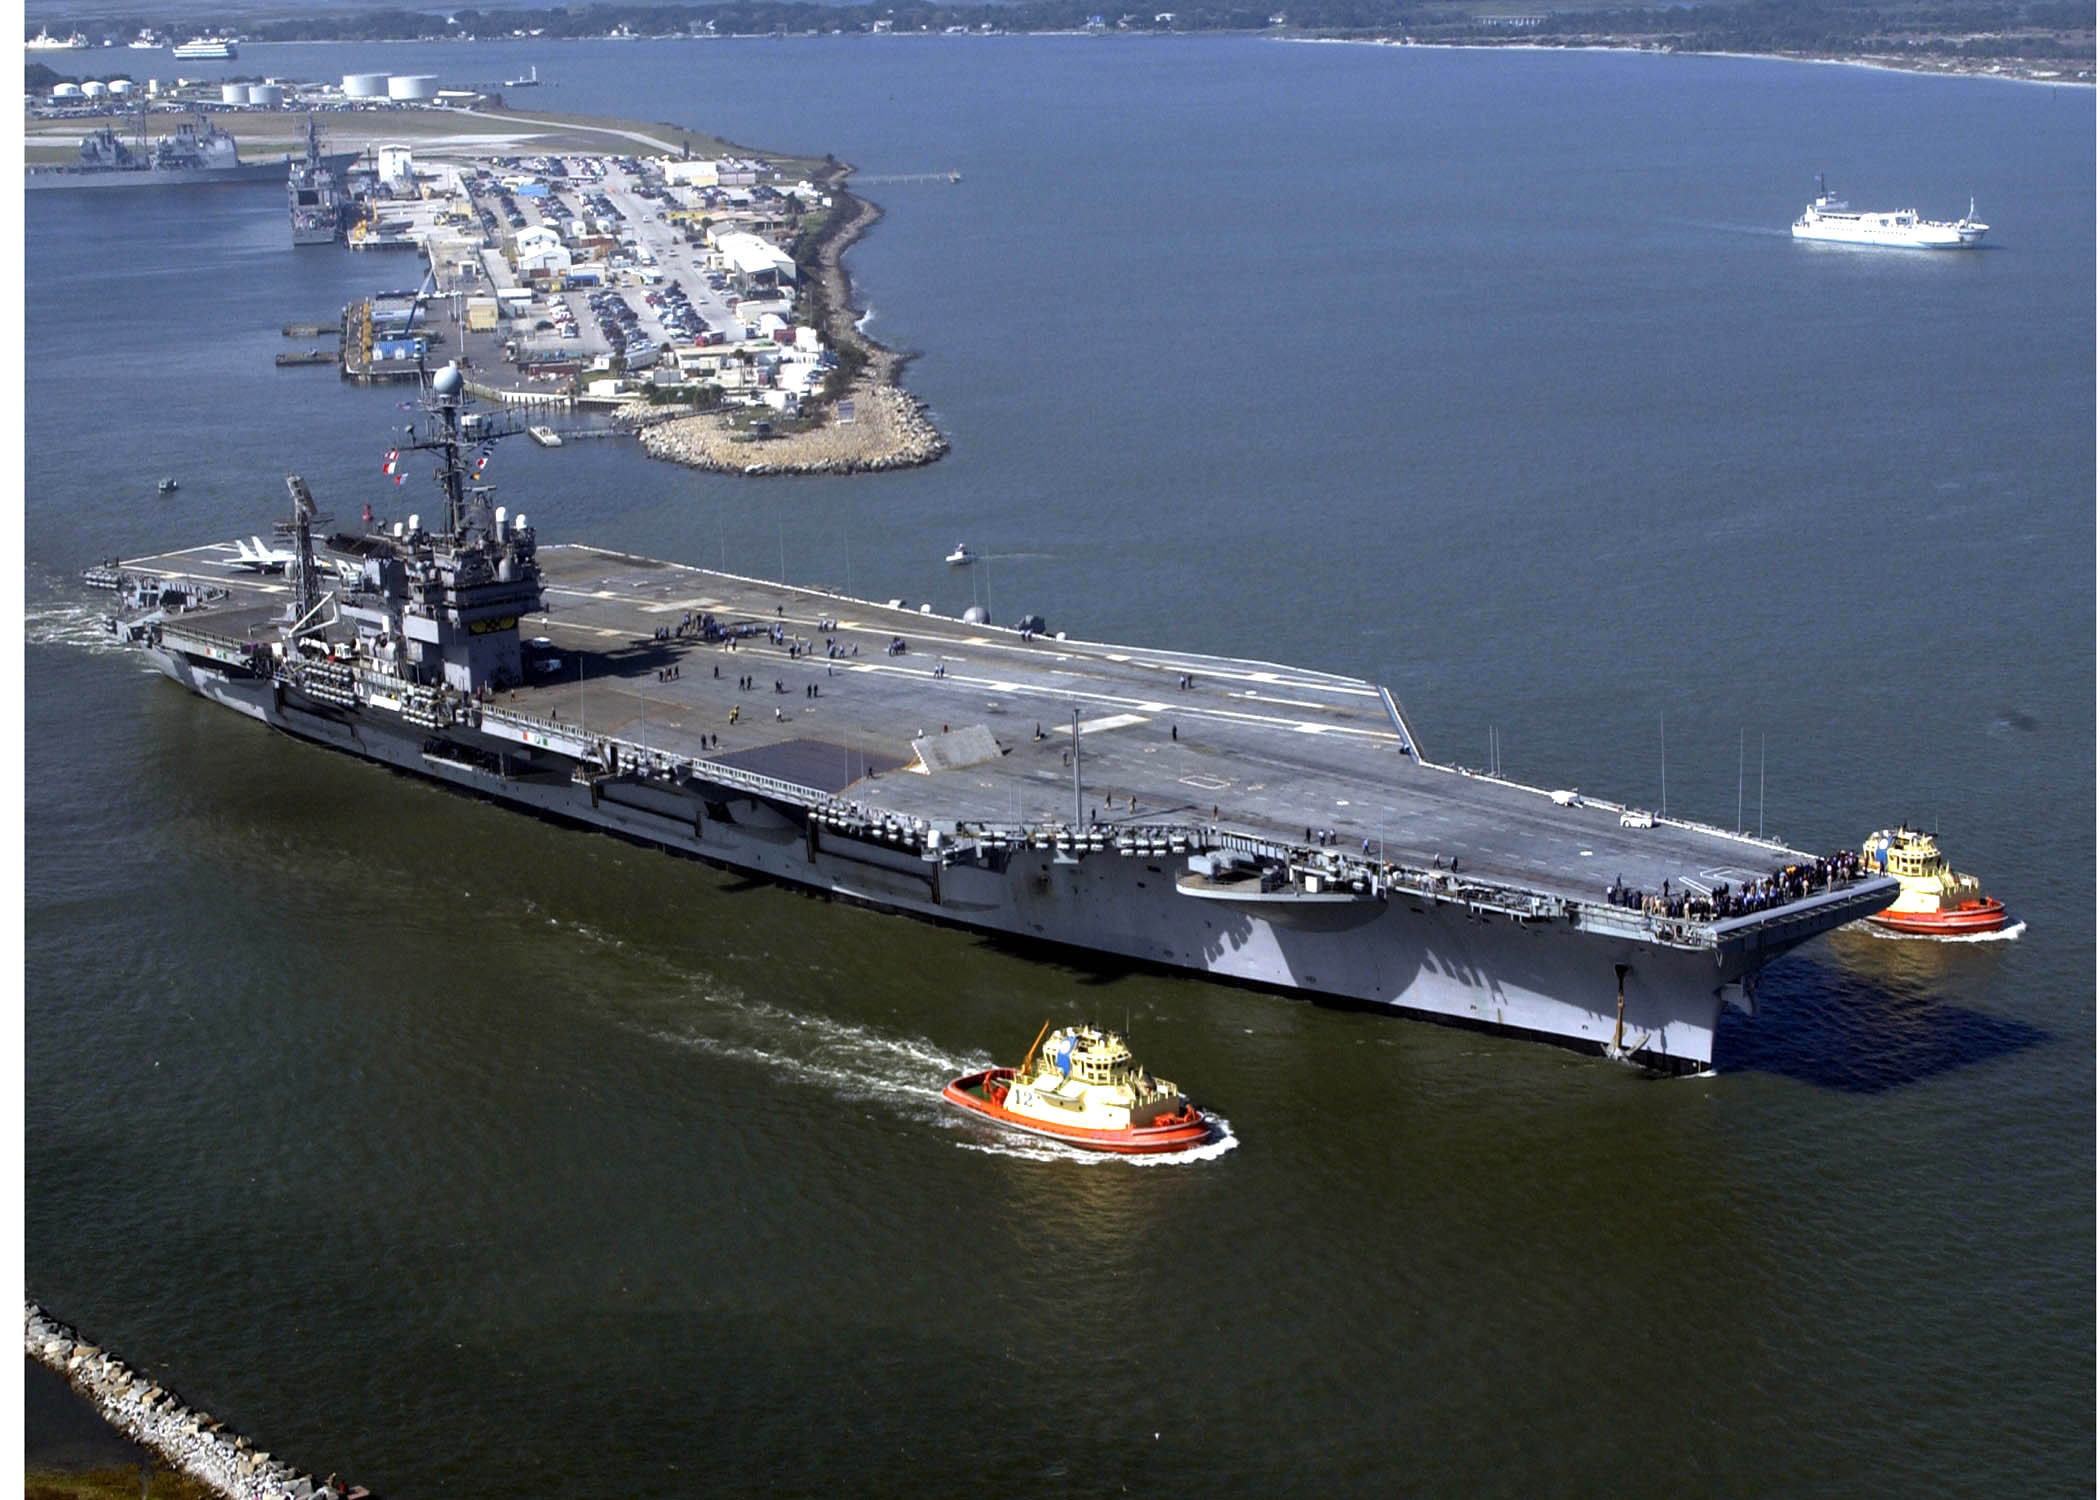 May 27, 1967 – The USS John F. Kennedy Becomes the Last Conventionally Powered Carrier Built for the US Navy. Every Carrier Since has been Powered by Nuclear.